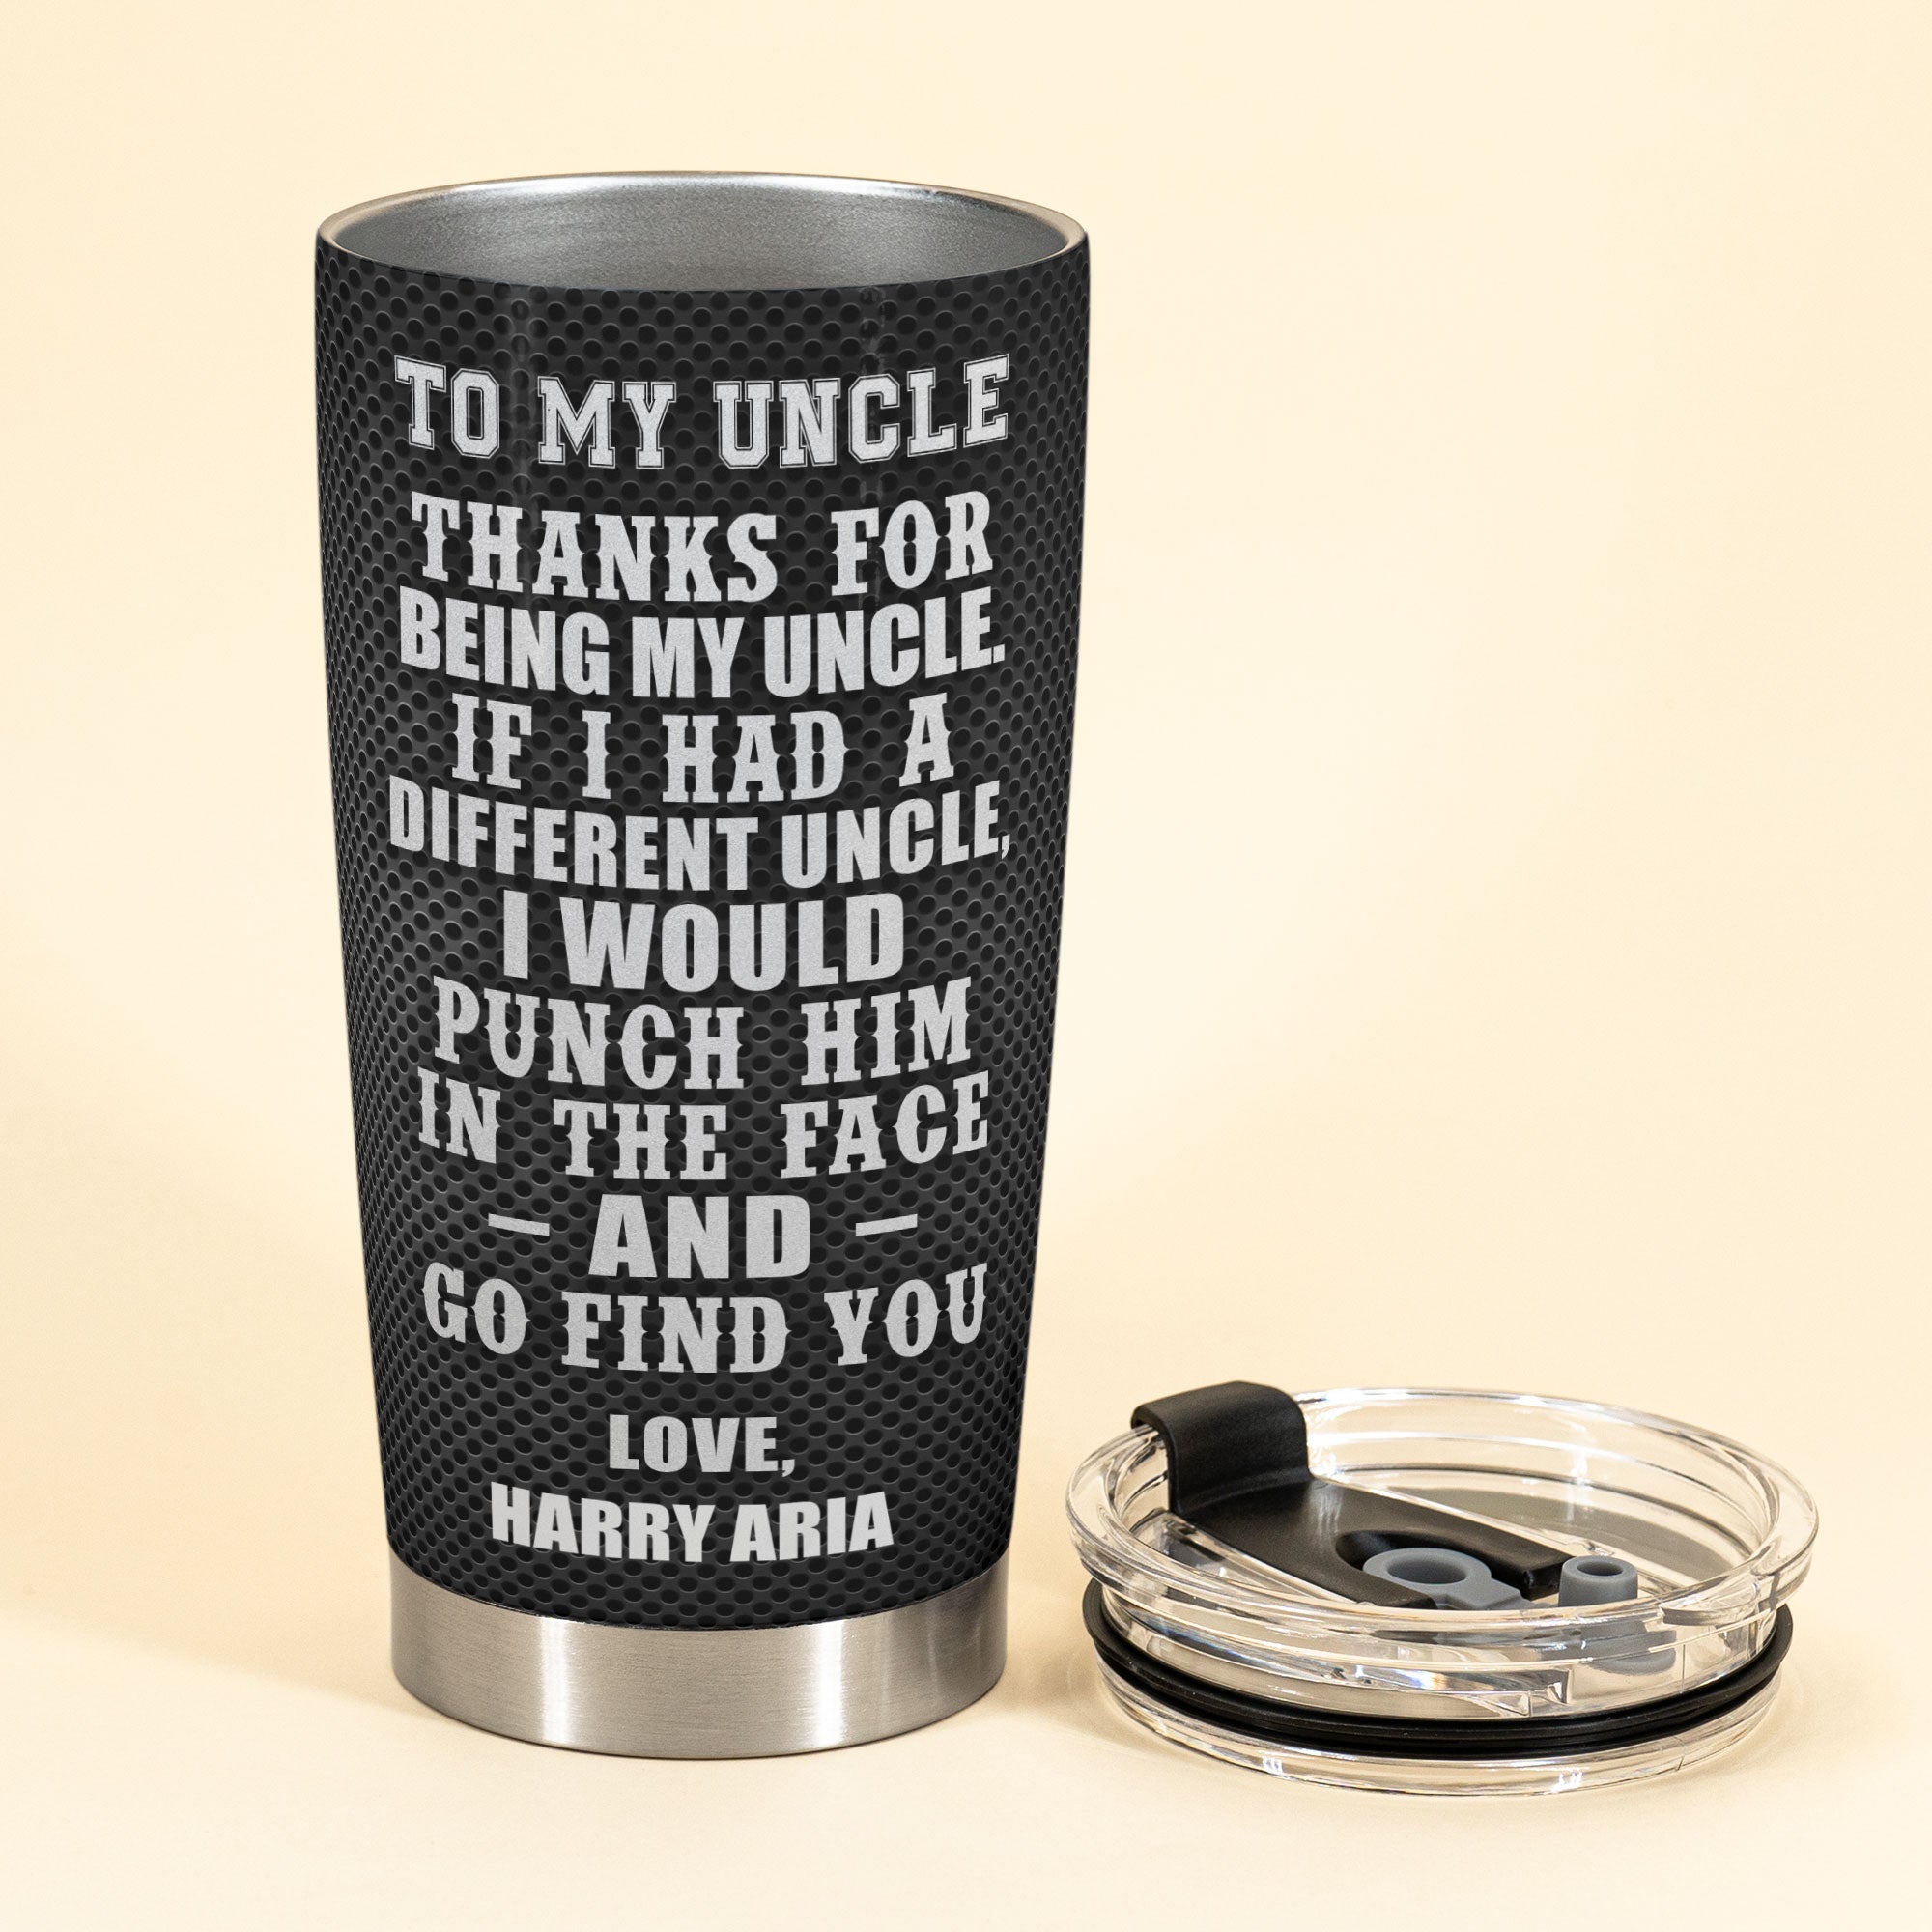 Indigifts Decorative Gift Items Gift for Uncle, Uncle Gift, Gift for Uncle  Birthday, Gift for Uncle and Aunty Anniversary, S-MUGCRWH01RO11-UNC17027  Ceramic Coffee Mug Price in India - Buy Indigifts Decorative Gift Items